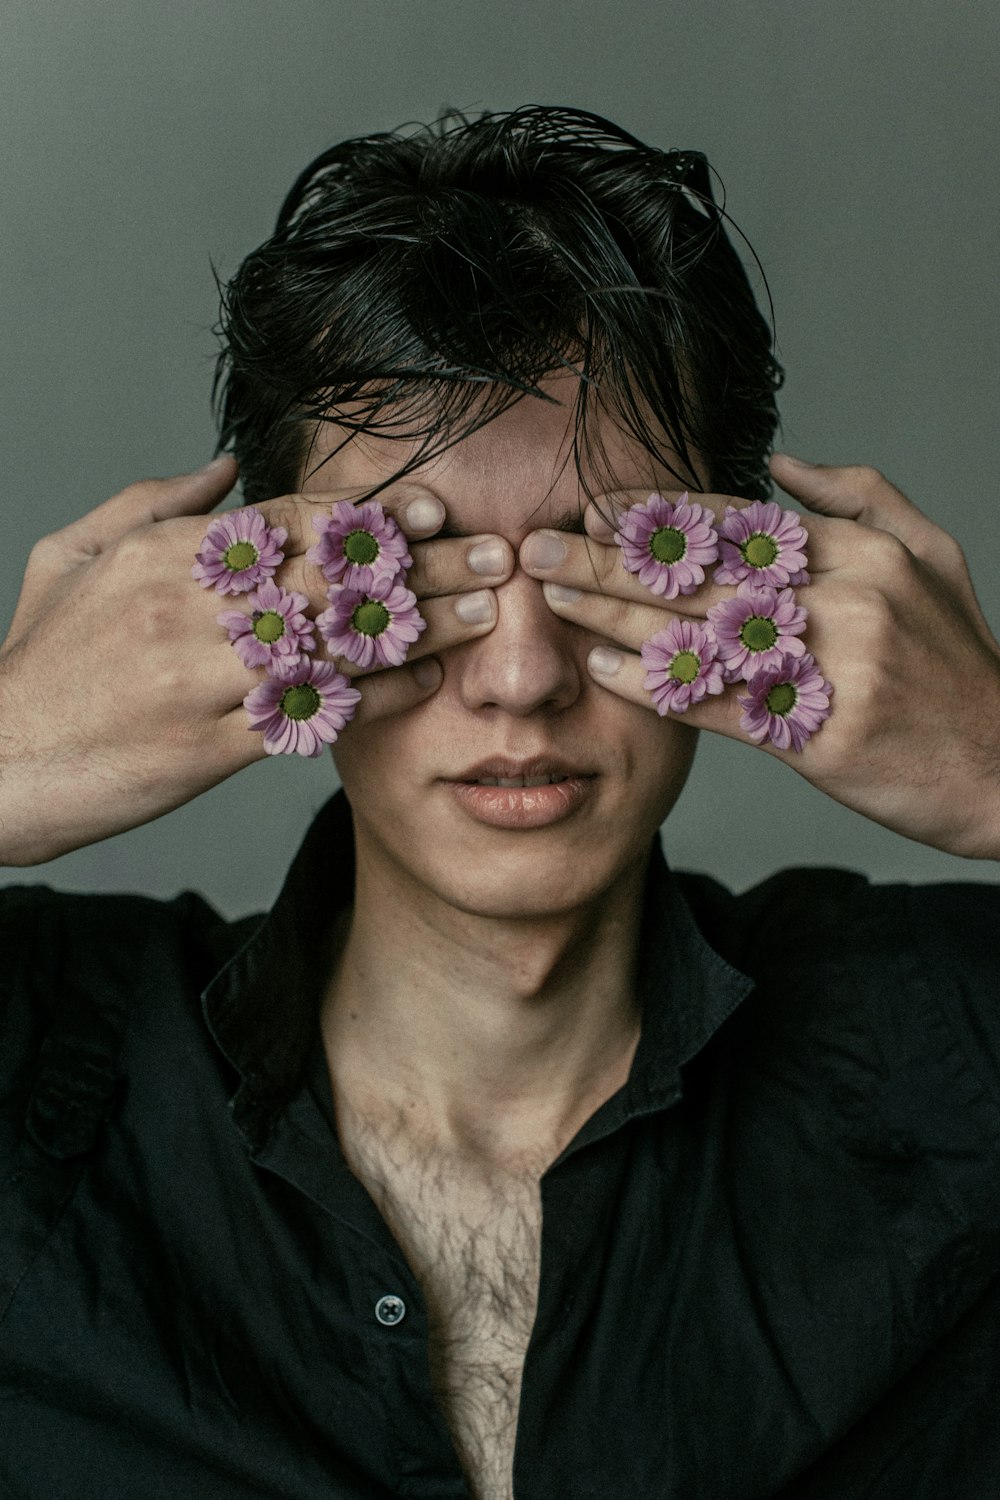 a man covering his eyes with pink flowers